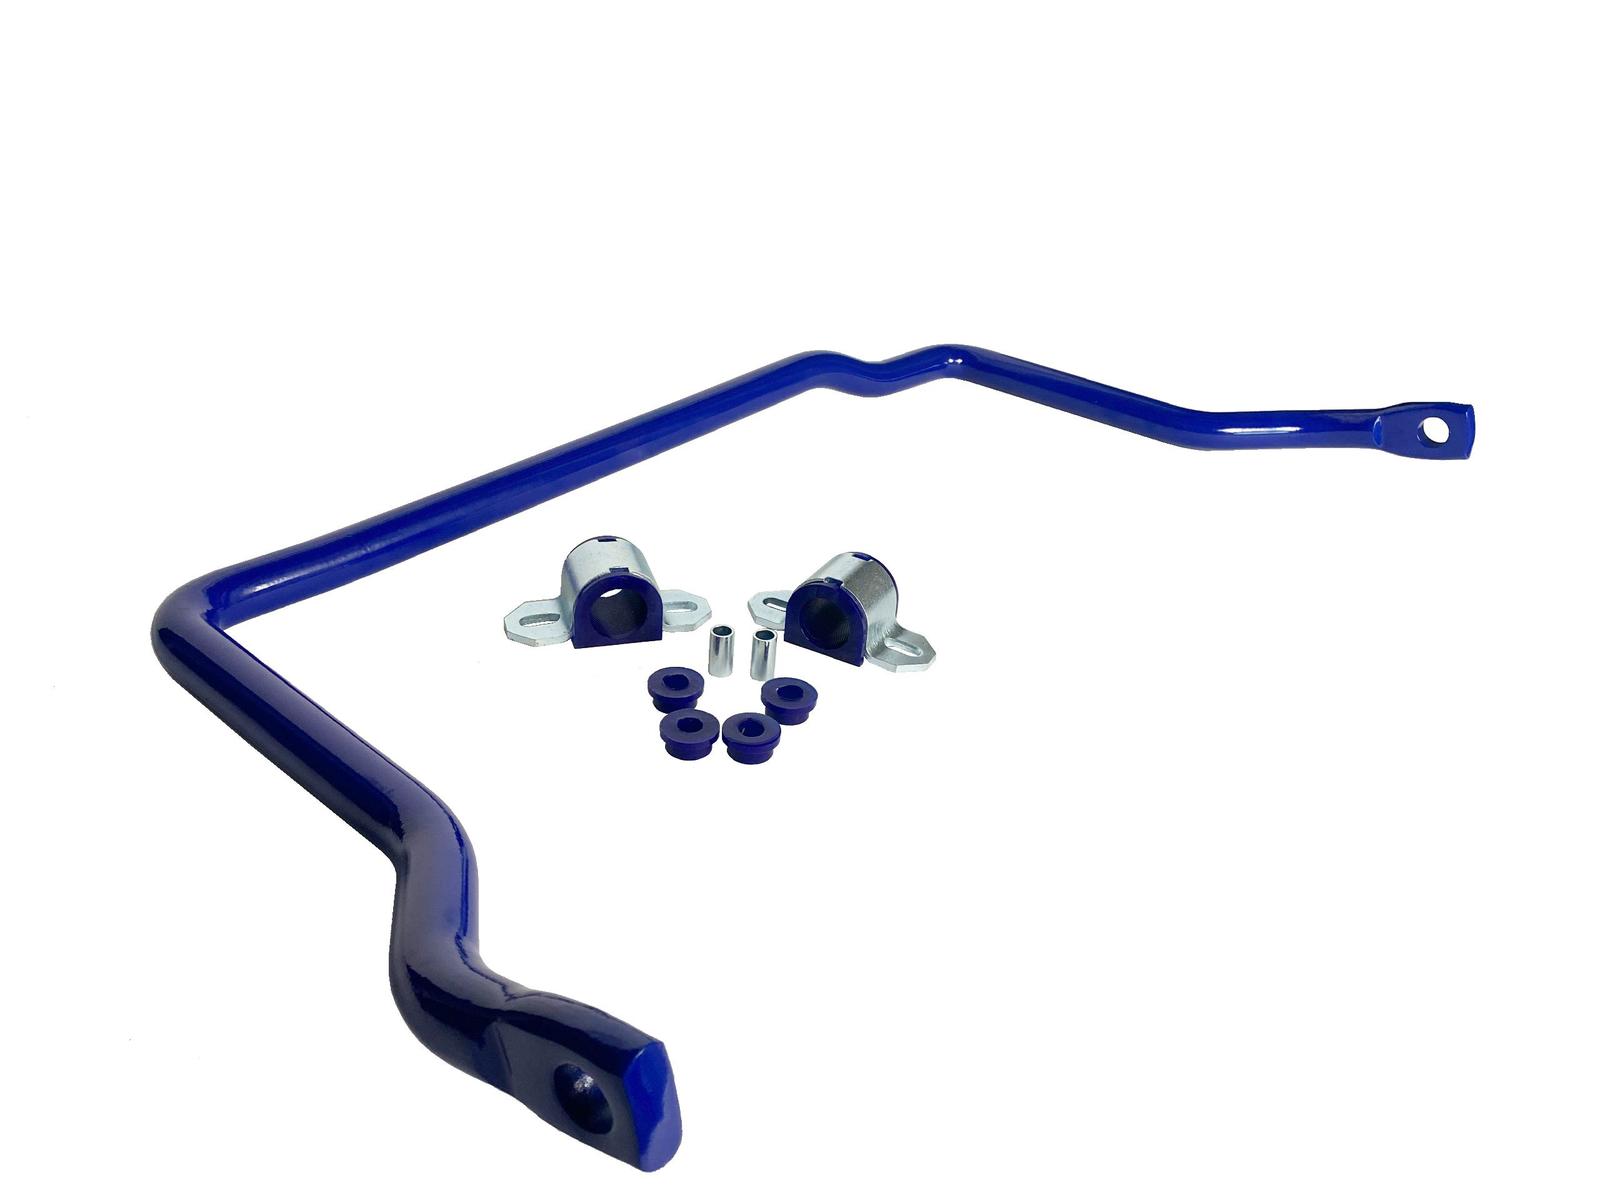 30mm Heavy Duty Front 4x4 Sway Bar Kit to suit Toyota Land Cruiser 80 Series 1993-1997 & 105 Series